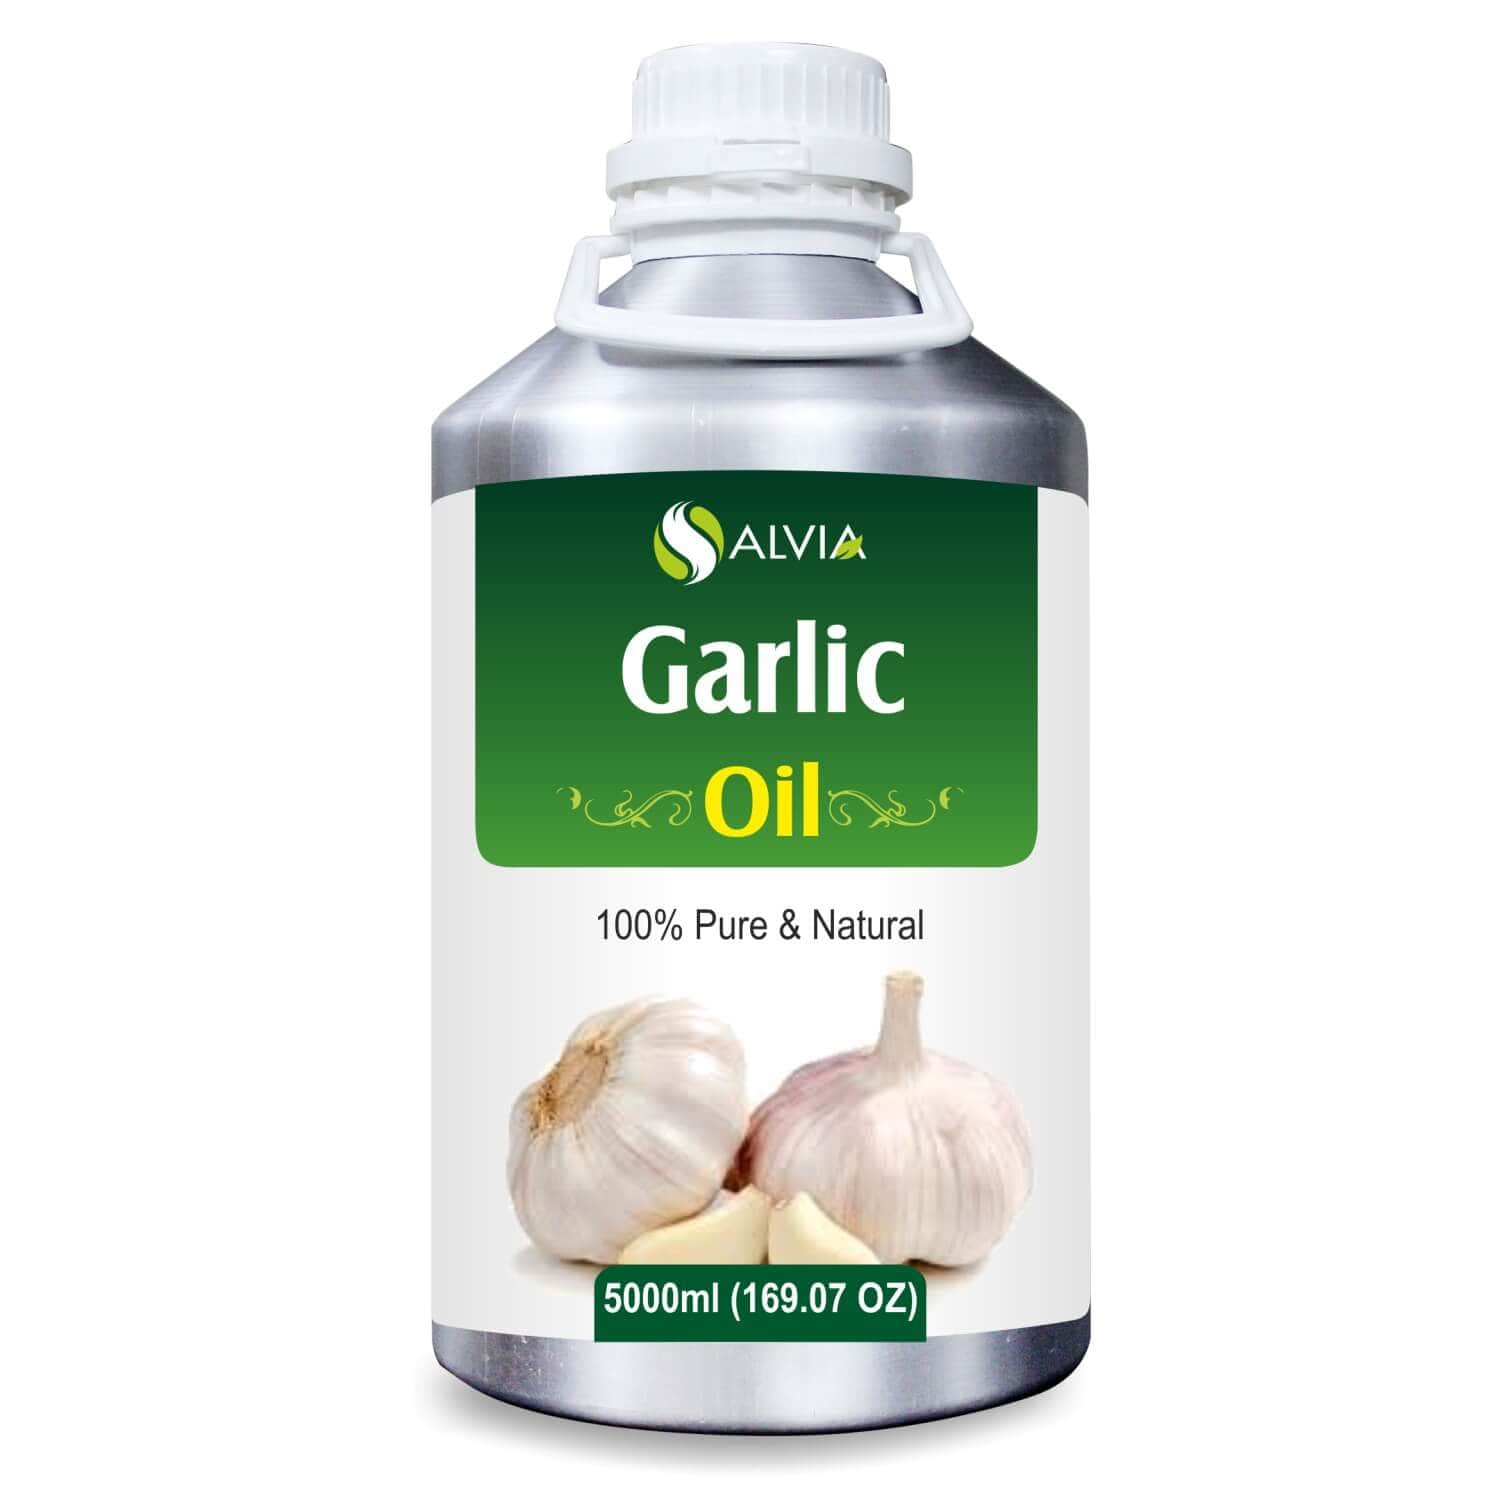 Salvia Natural Essential Oils Garlic Oil (Allium Sativum) 100% Natural Pure Essential Oil Solves Fungal Infection, Improves Immunity, Diminishes Blemishes & Acne Marks, Promotes Hair Growth